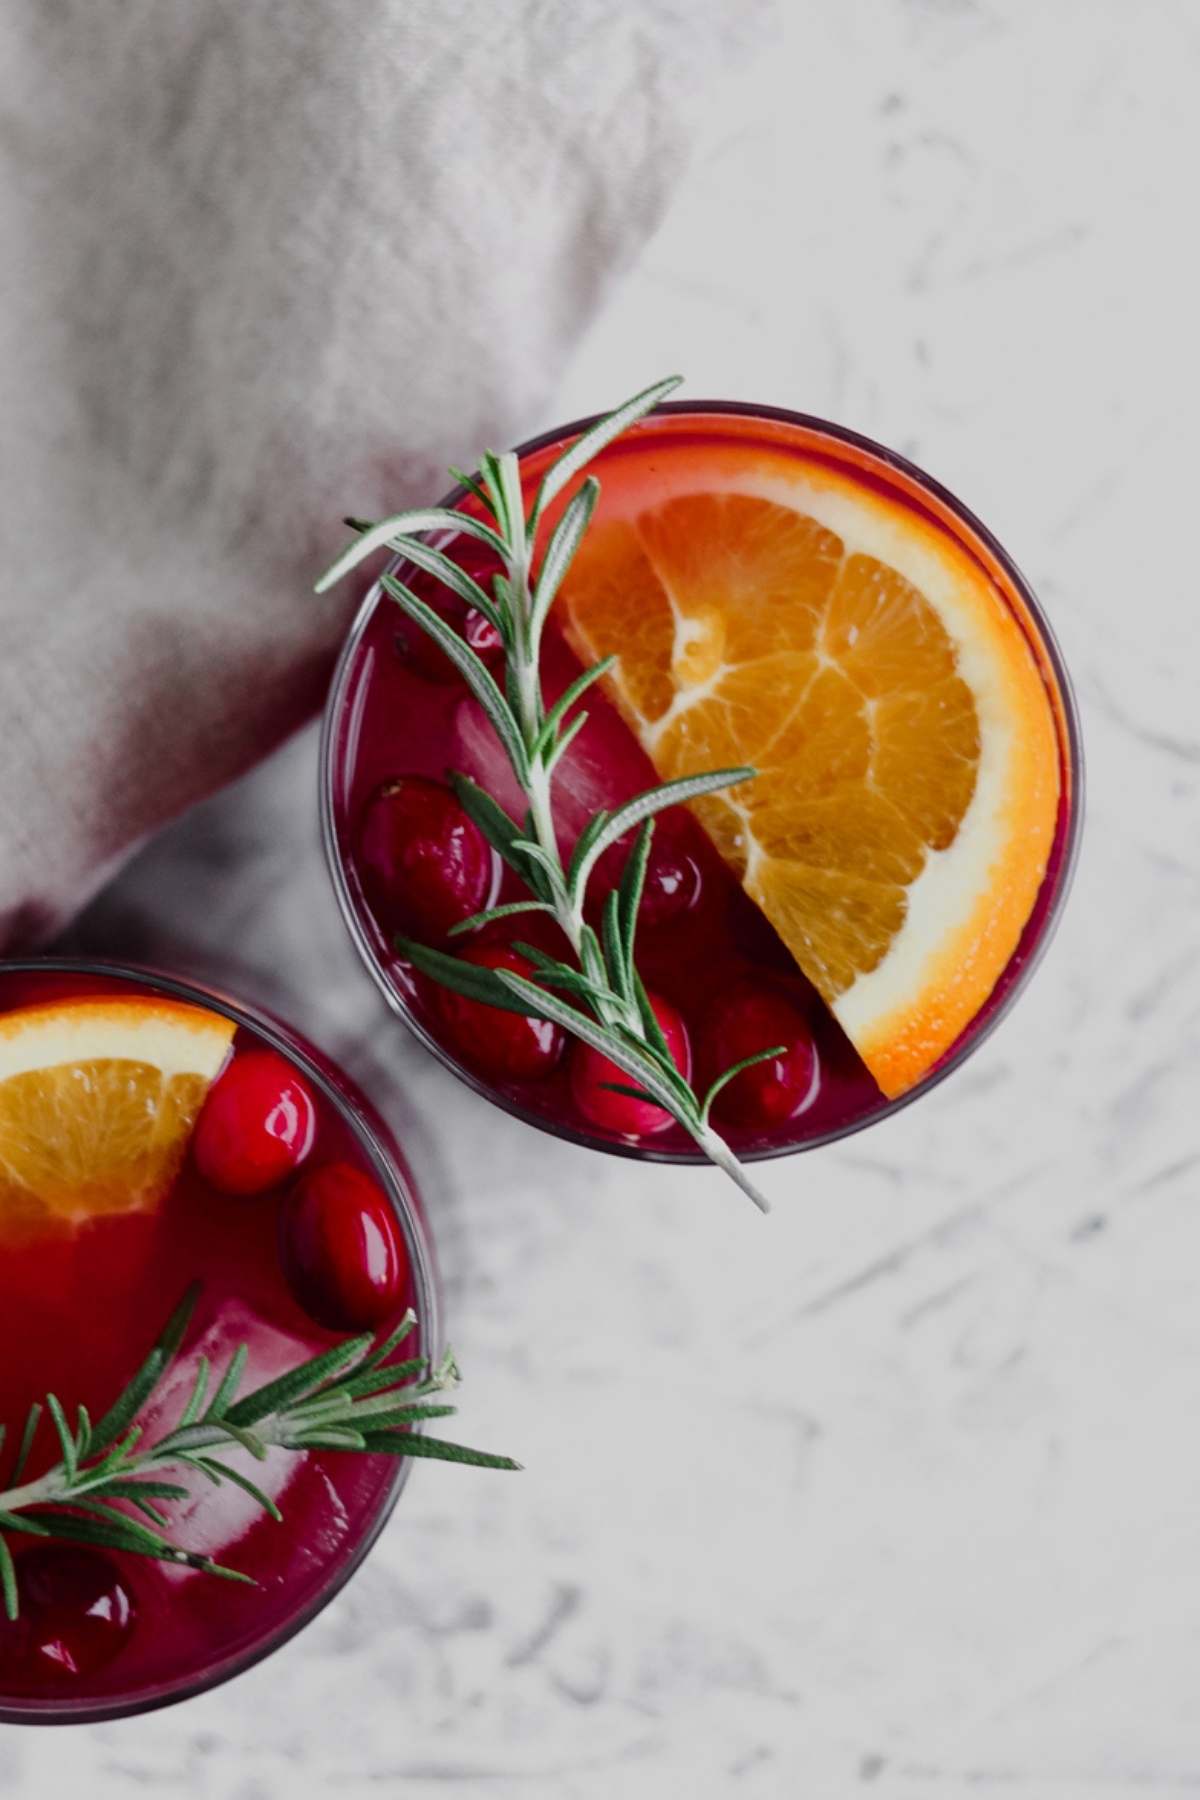 A top down view of a glass filled with cranberry orange sangria, fresh cranberries, an orange slice, and a fresh rosemary sprig.